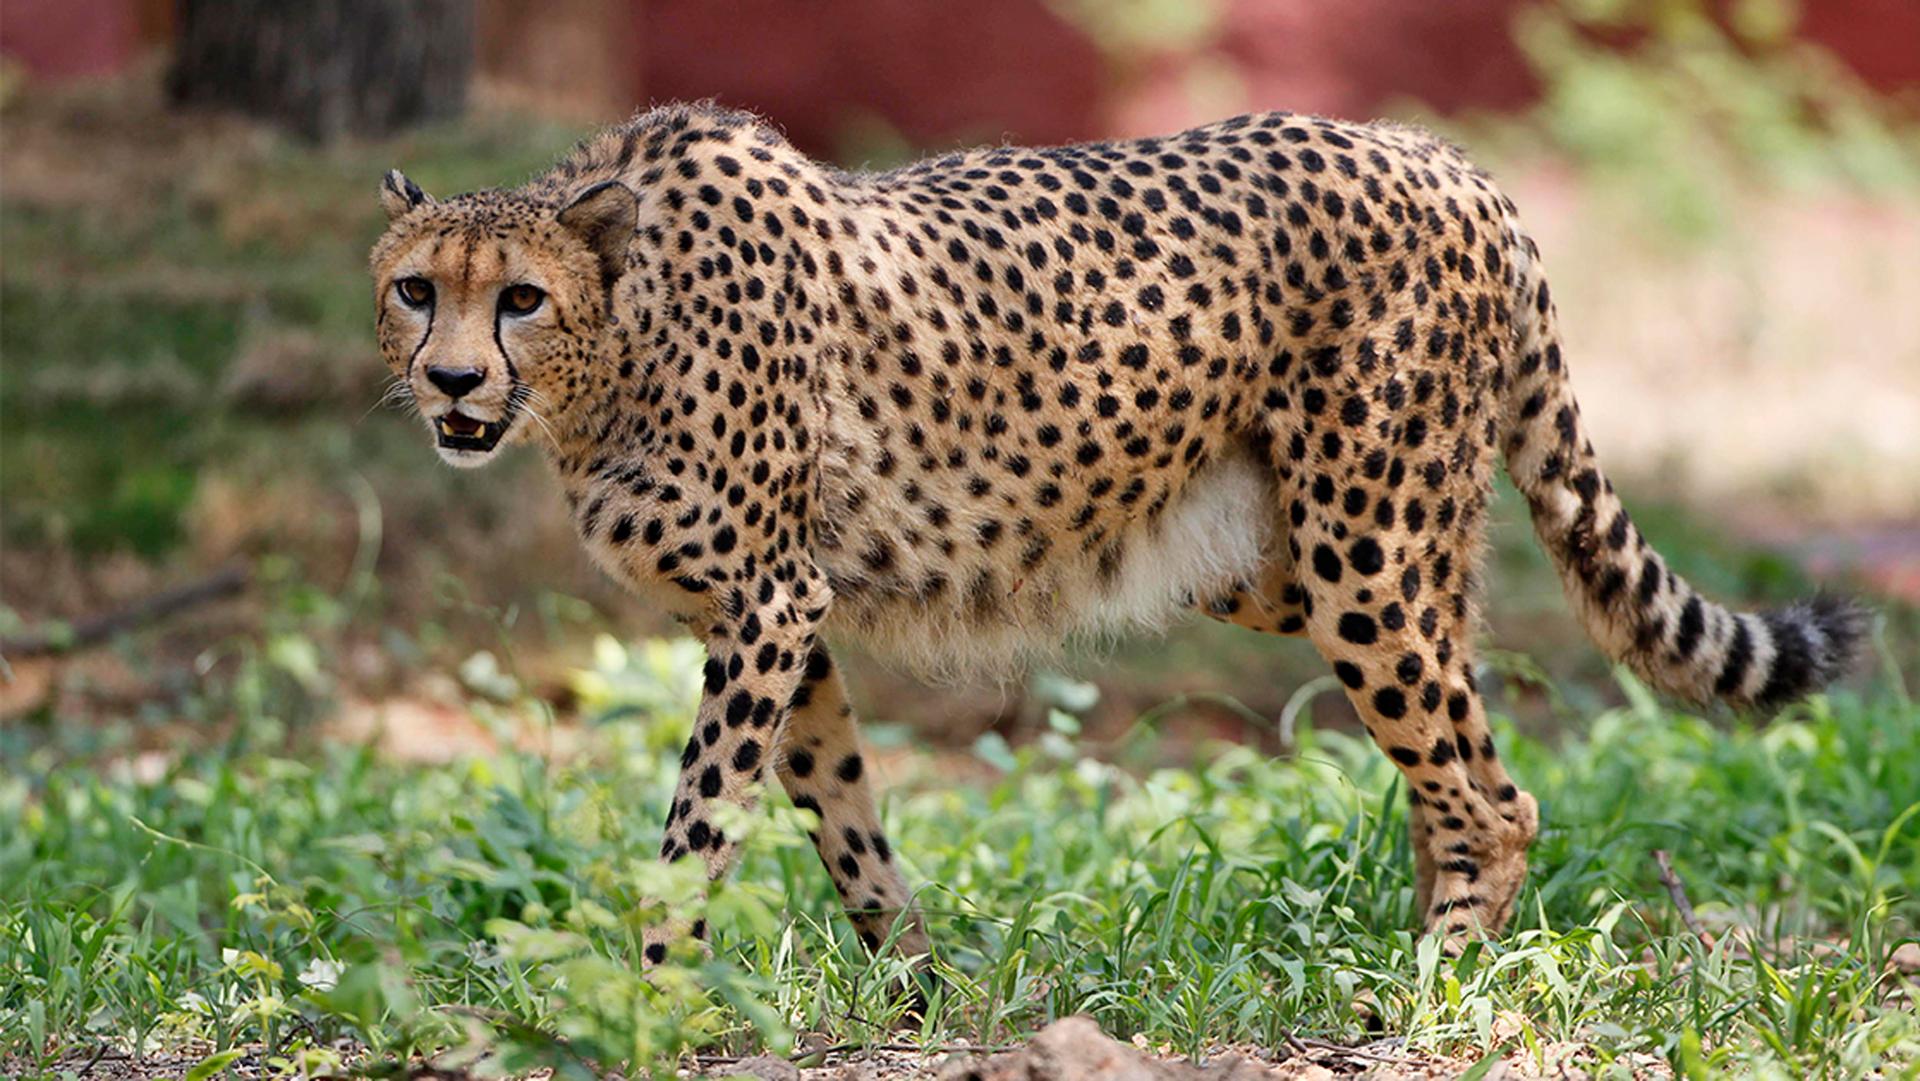 A male African Cheetah named Dark is released at his enclosure at the Nehru Zoological Park in Hyderabad, India, May 12, 2012.